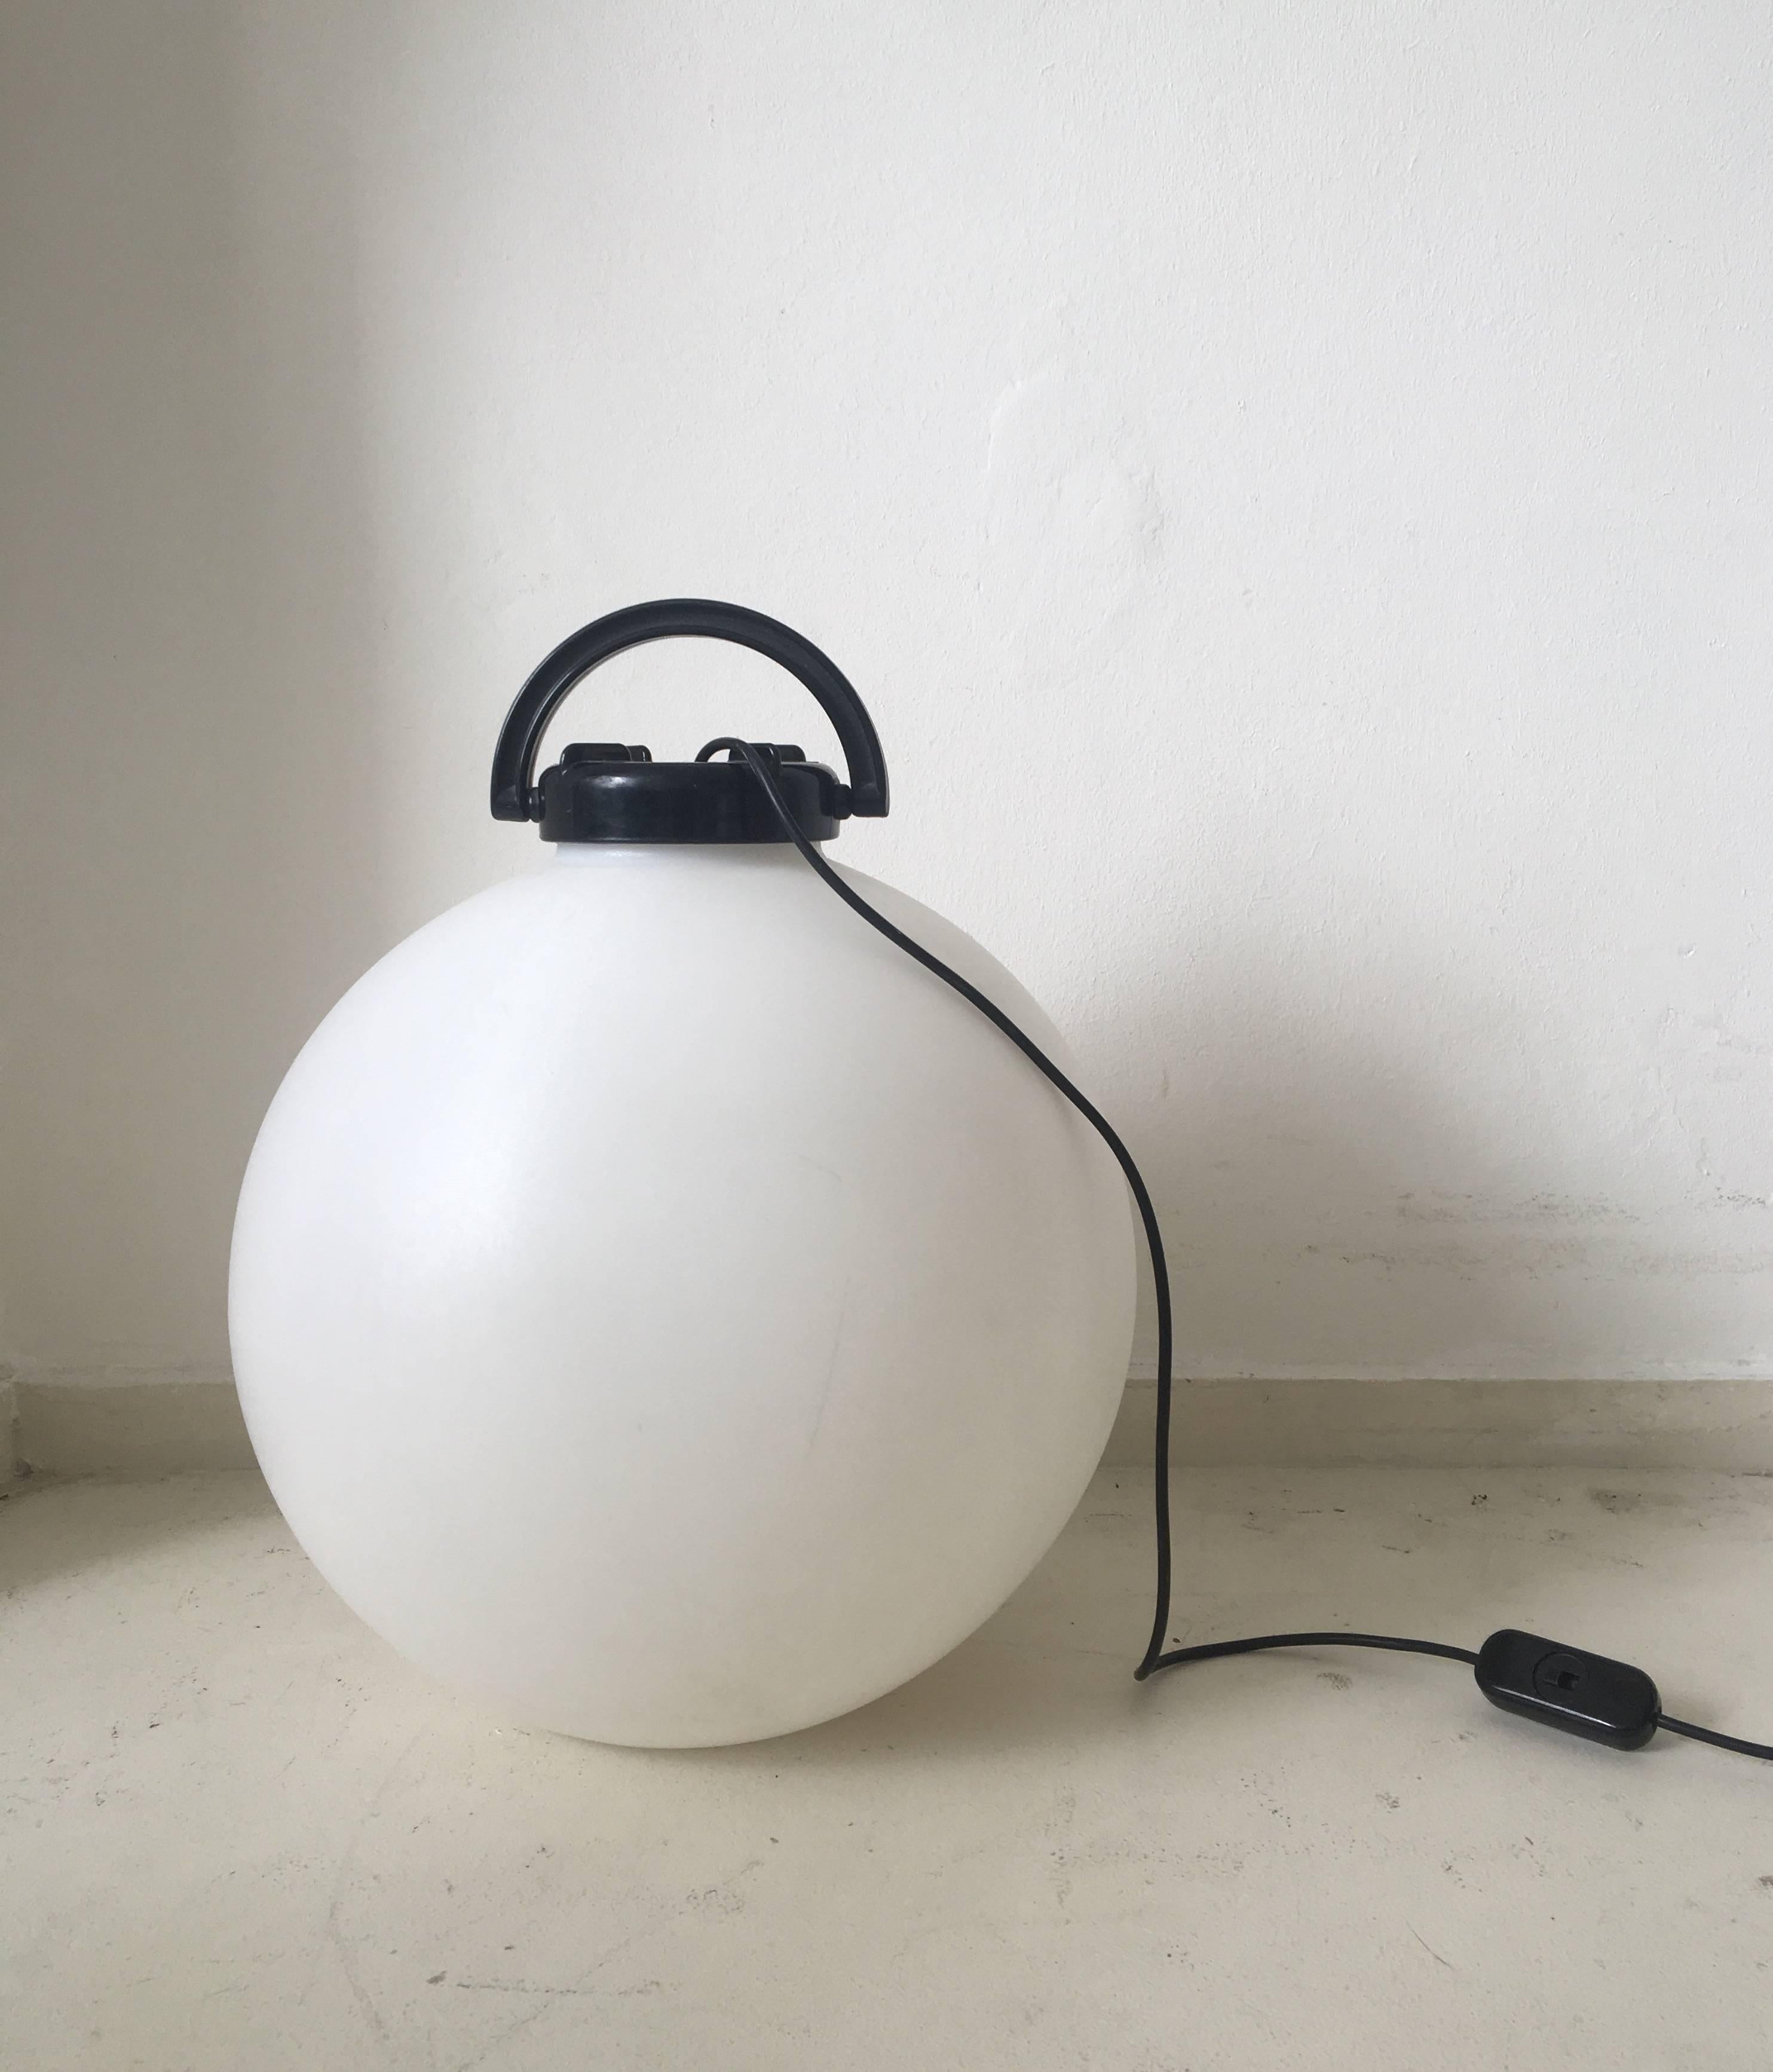 Gorgeous portable floor lamp designed by Isao Hosoe for Valenti Milano in 1975. This lamp features a white Polyurethan ball with a black ABS plastic handle which hold the signature. Can be used outside or inside as a floor lamp, a table lamp or